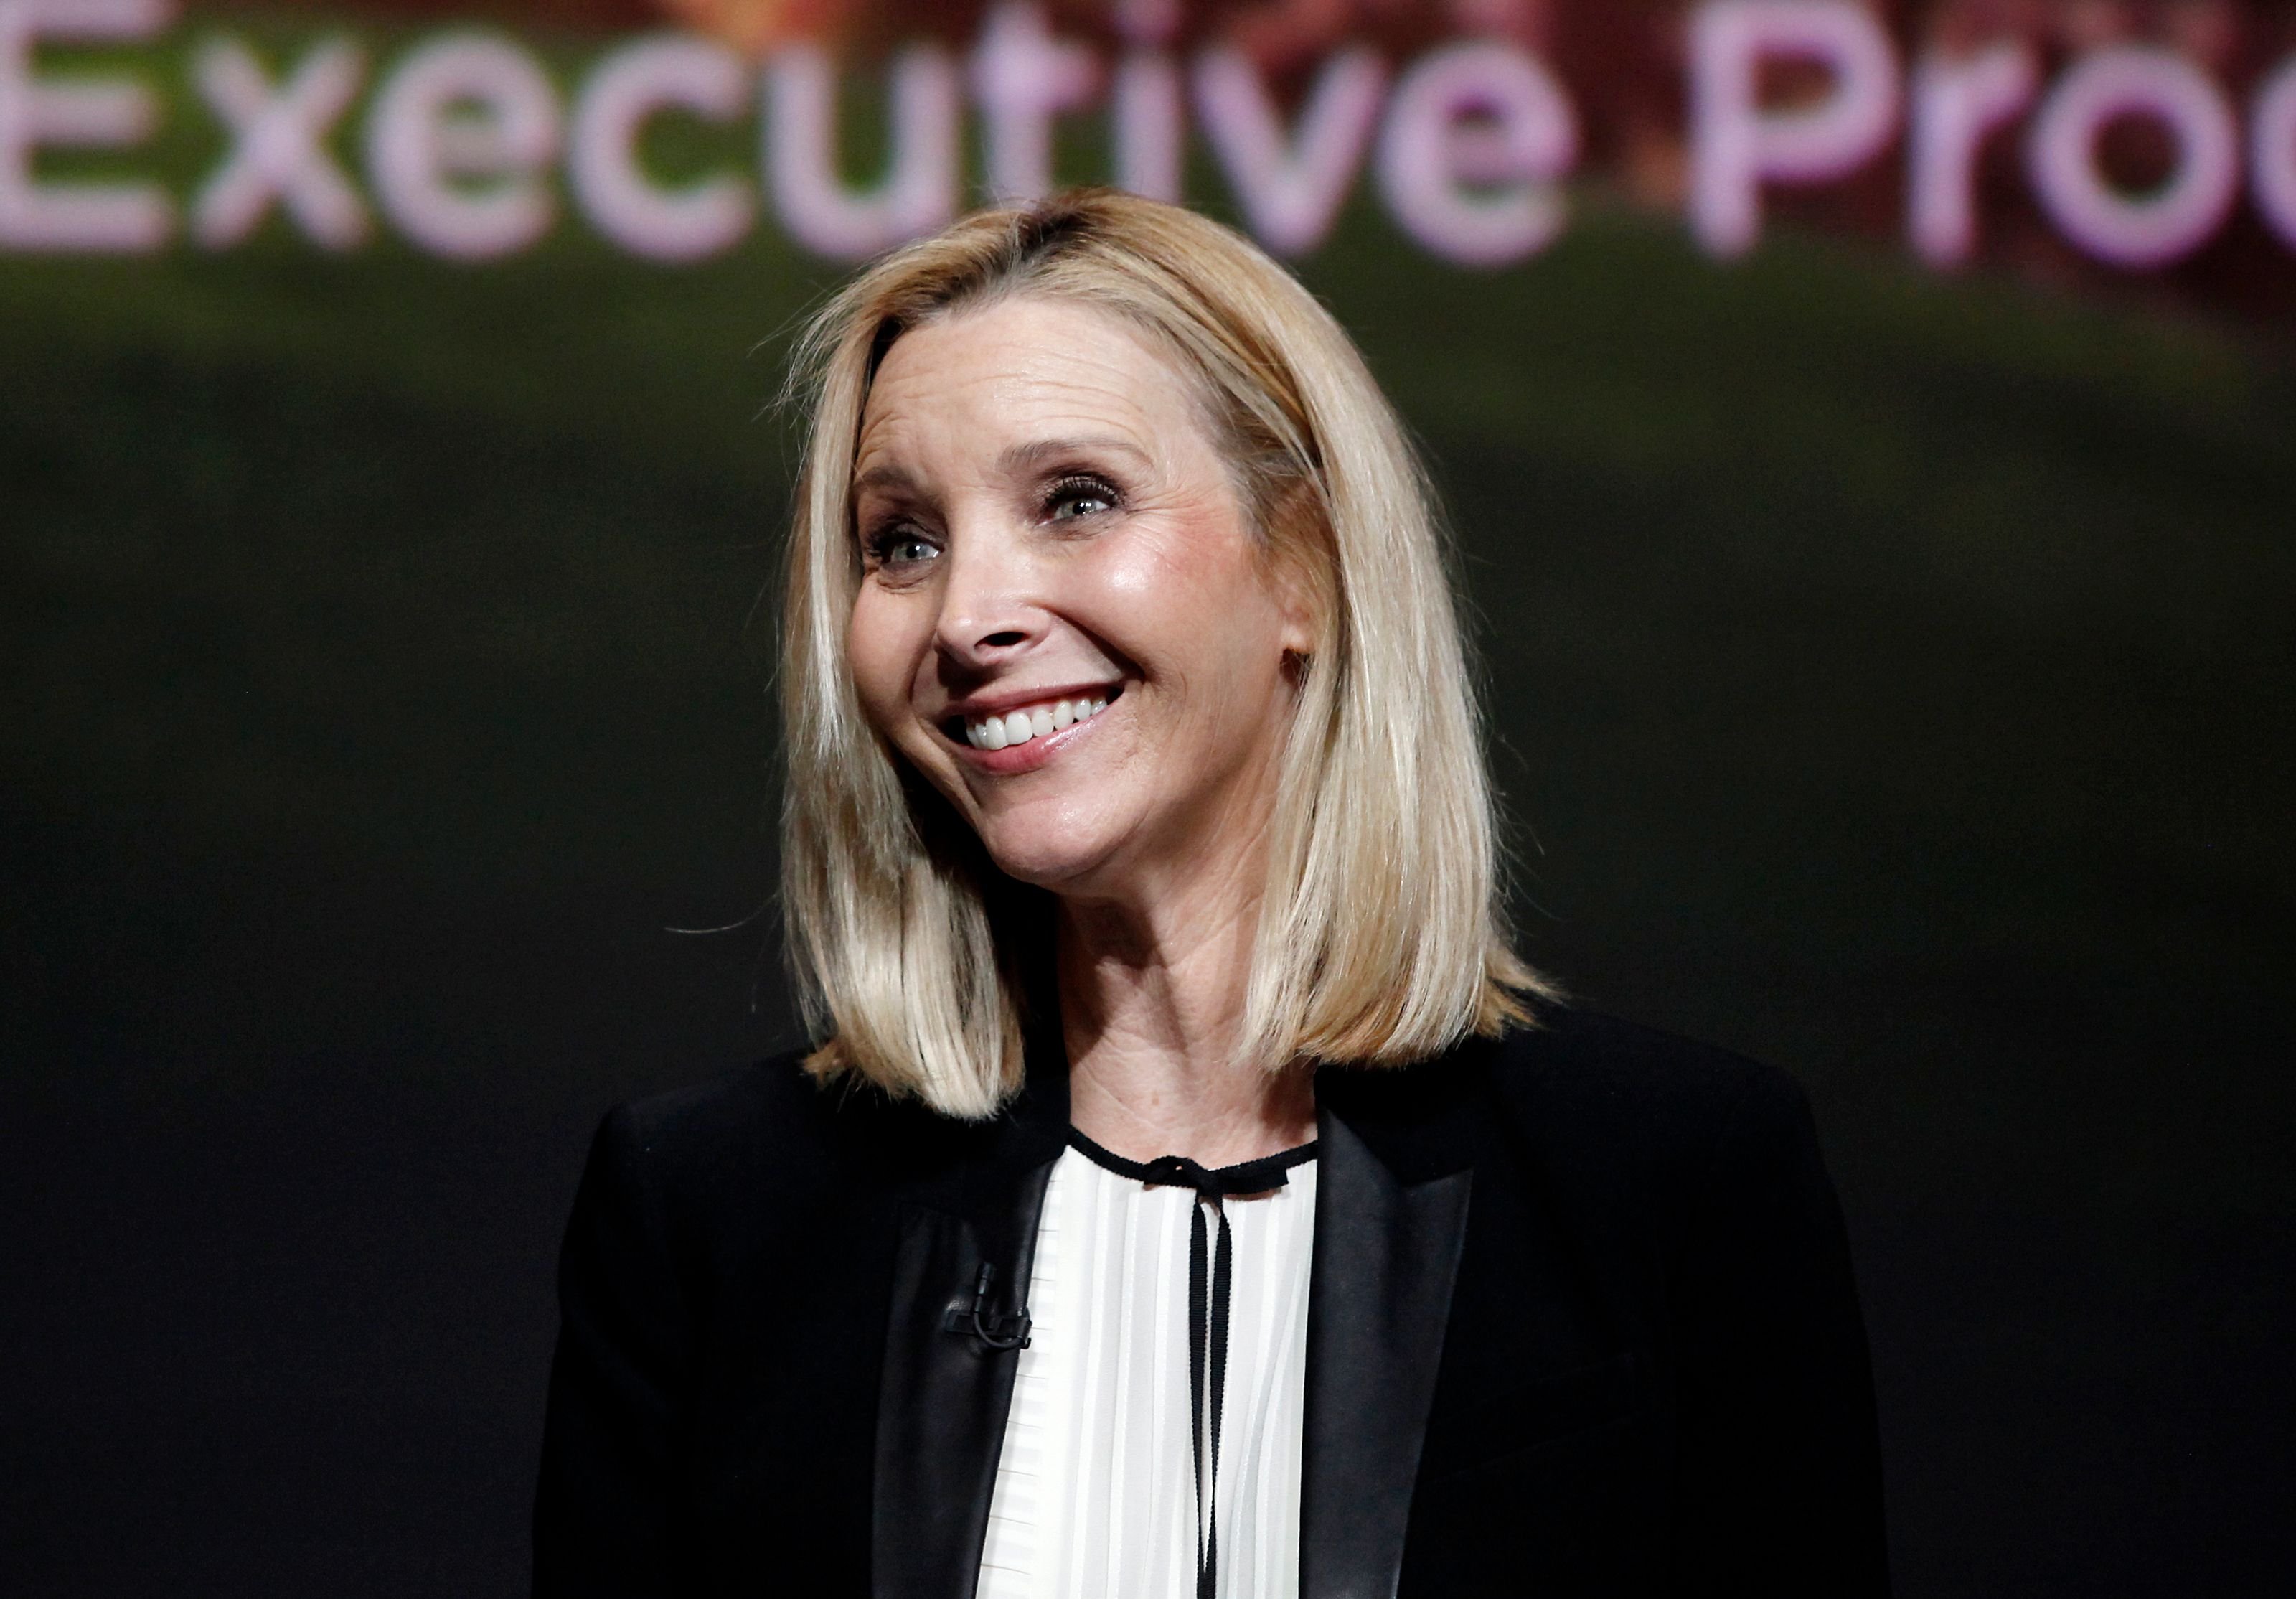 Lisa Kudrow at the 'Who Do You Think You Are?' FYC Event at Wolf Theatre on June 5, 2018 in North Hollywood, California. | Photo: Getty Images